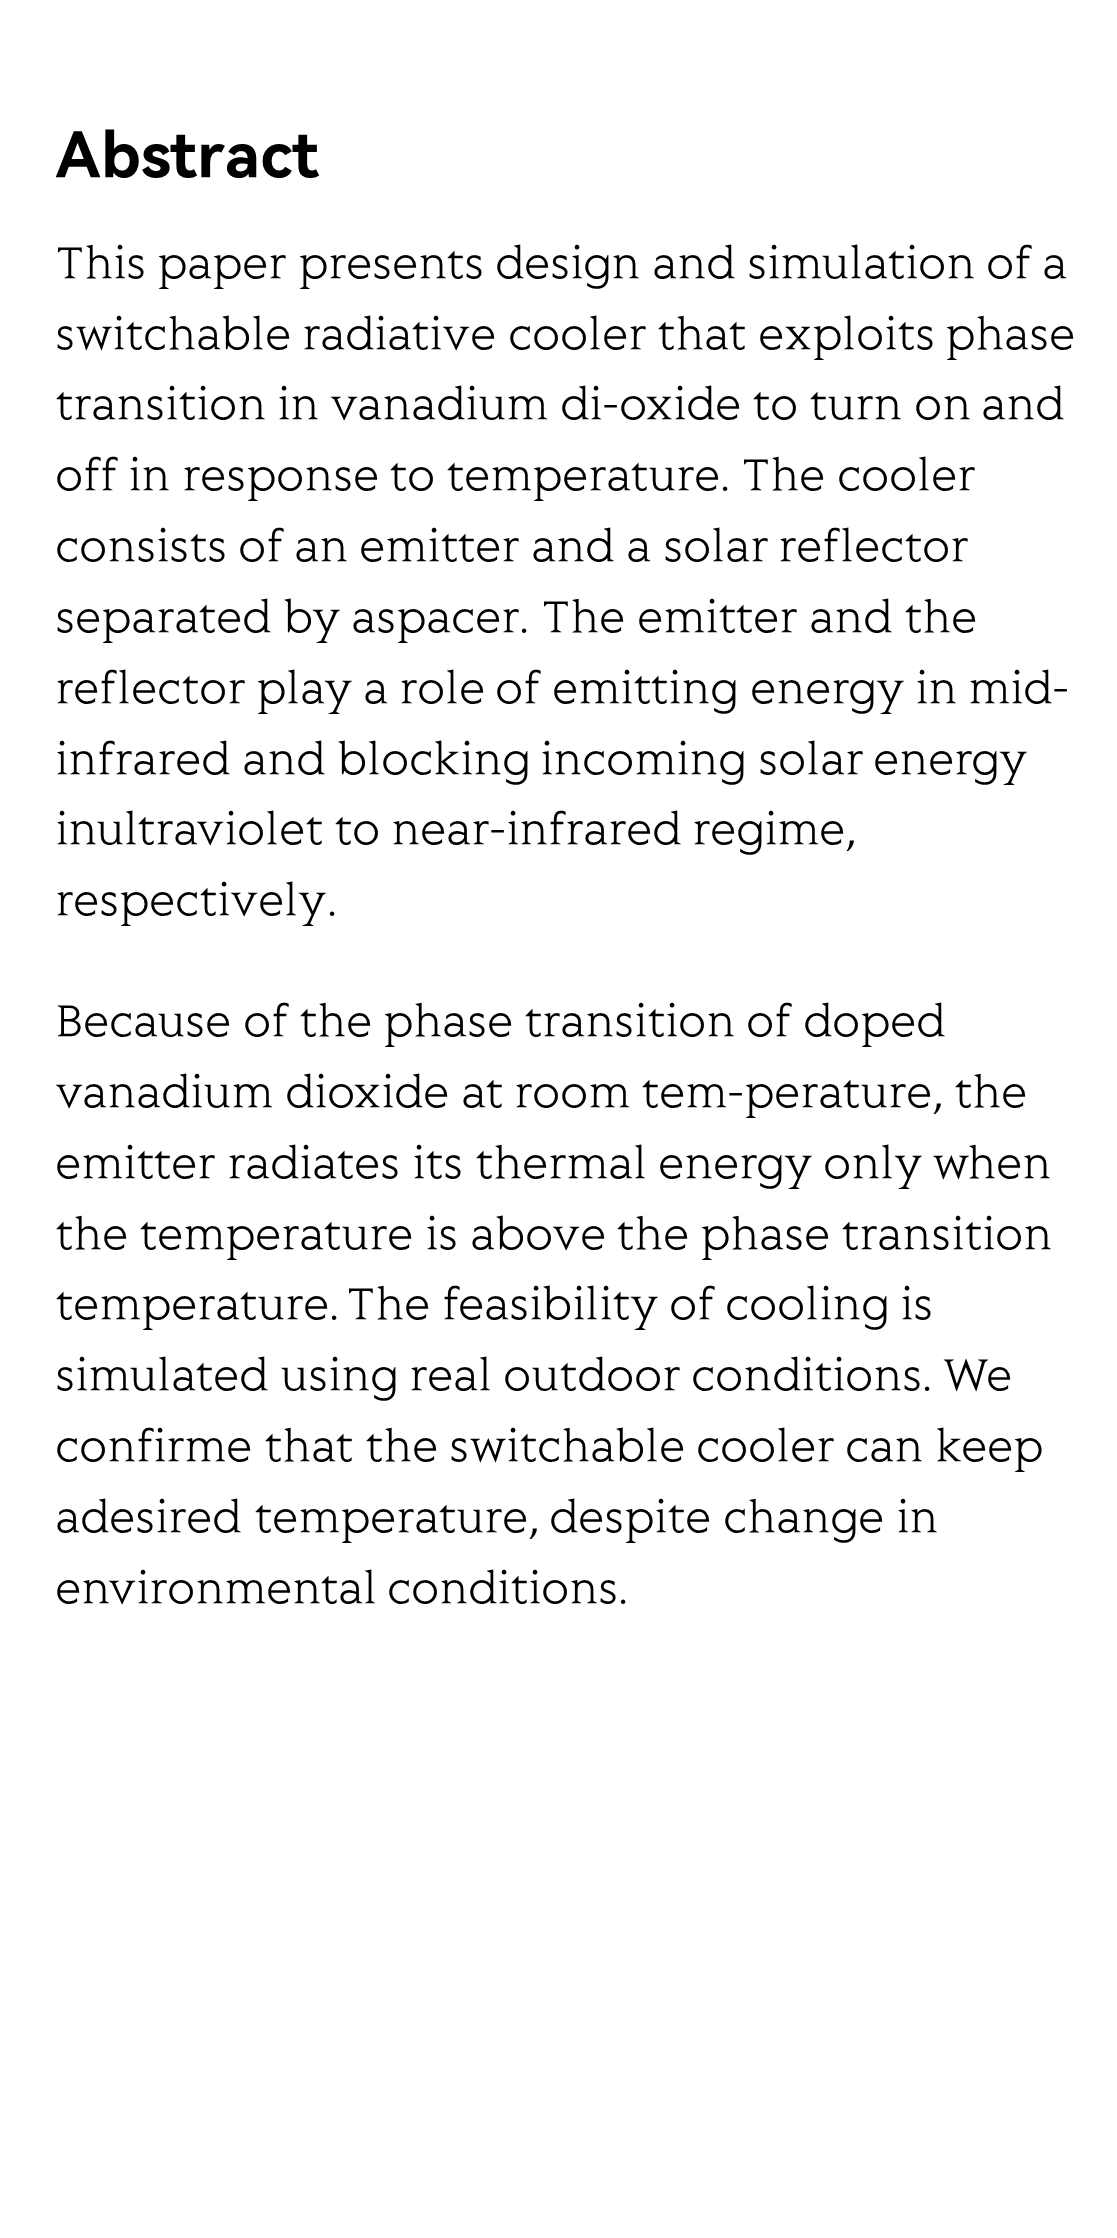 Switchable diurnal radiative cooling by doped VO2_2